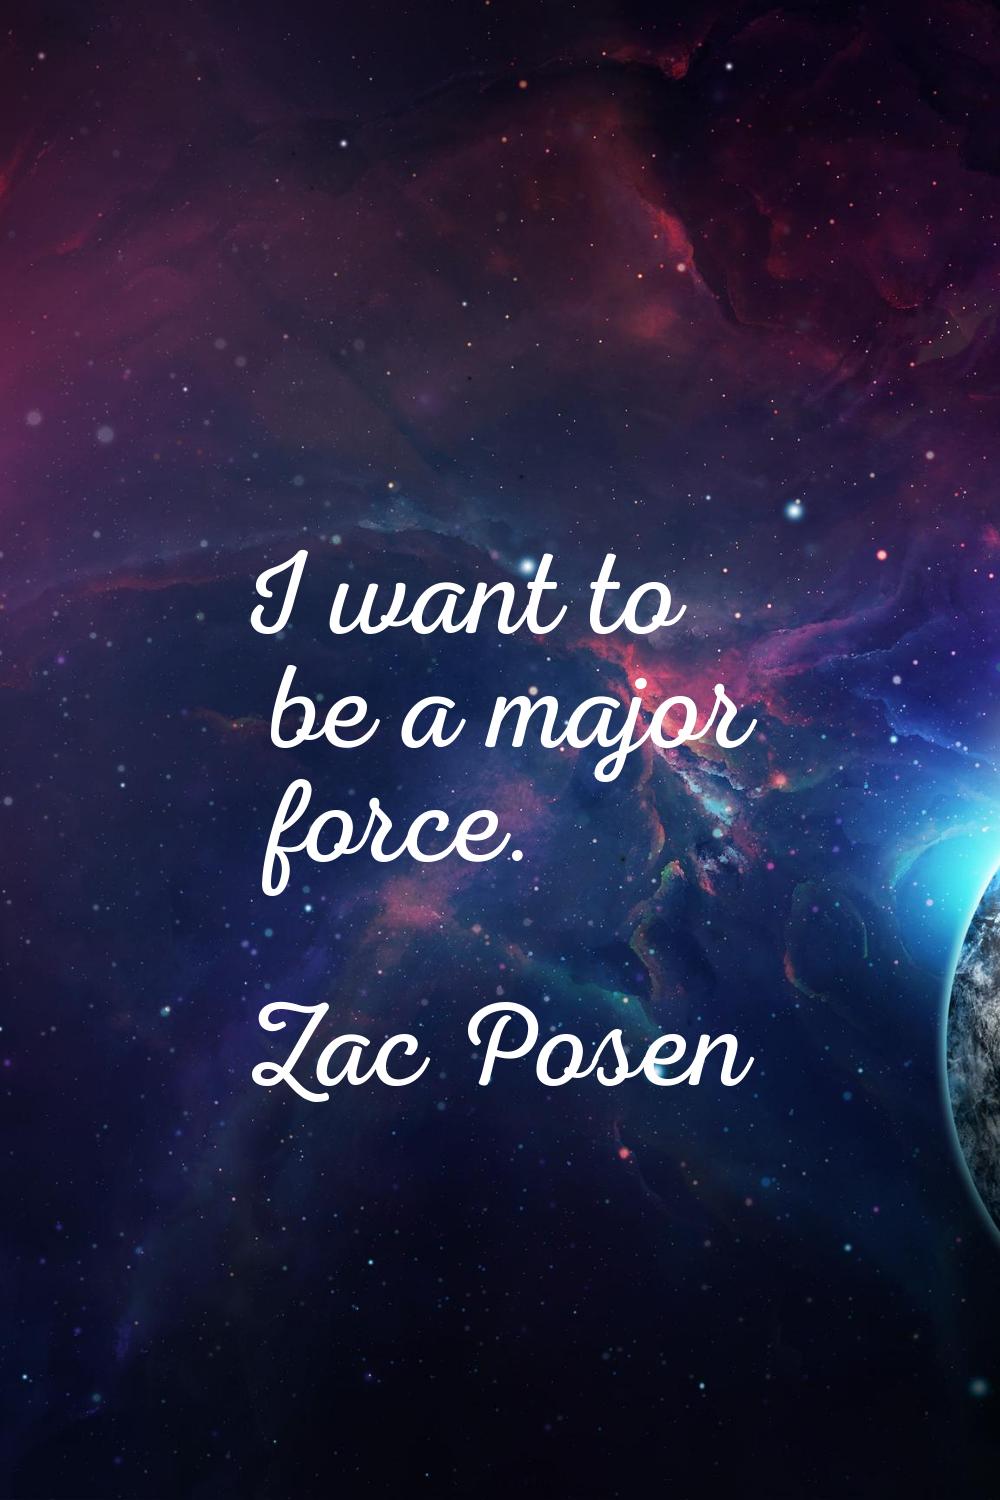 I want to be a major force.